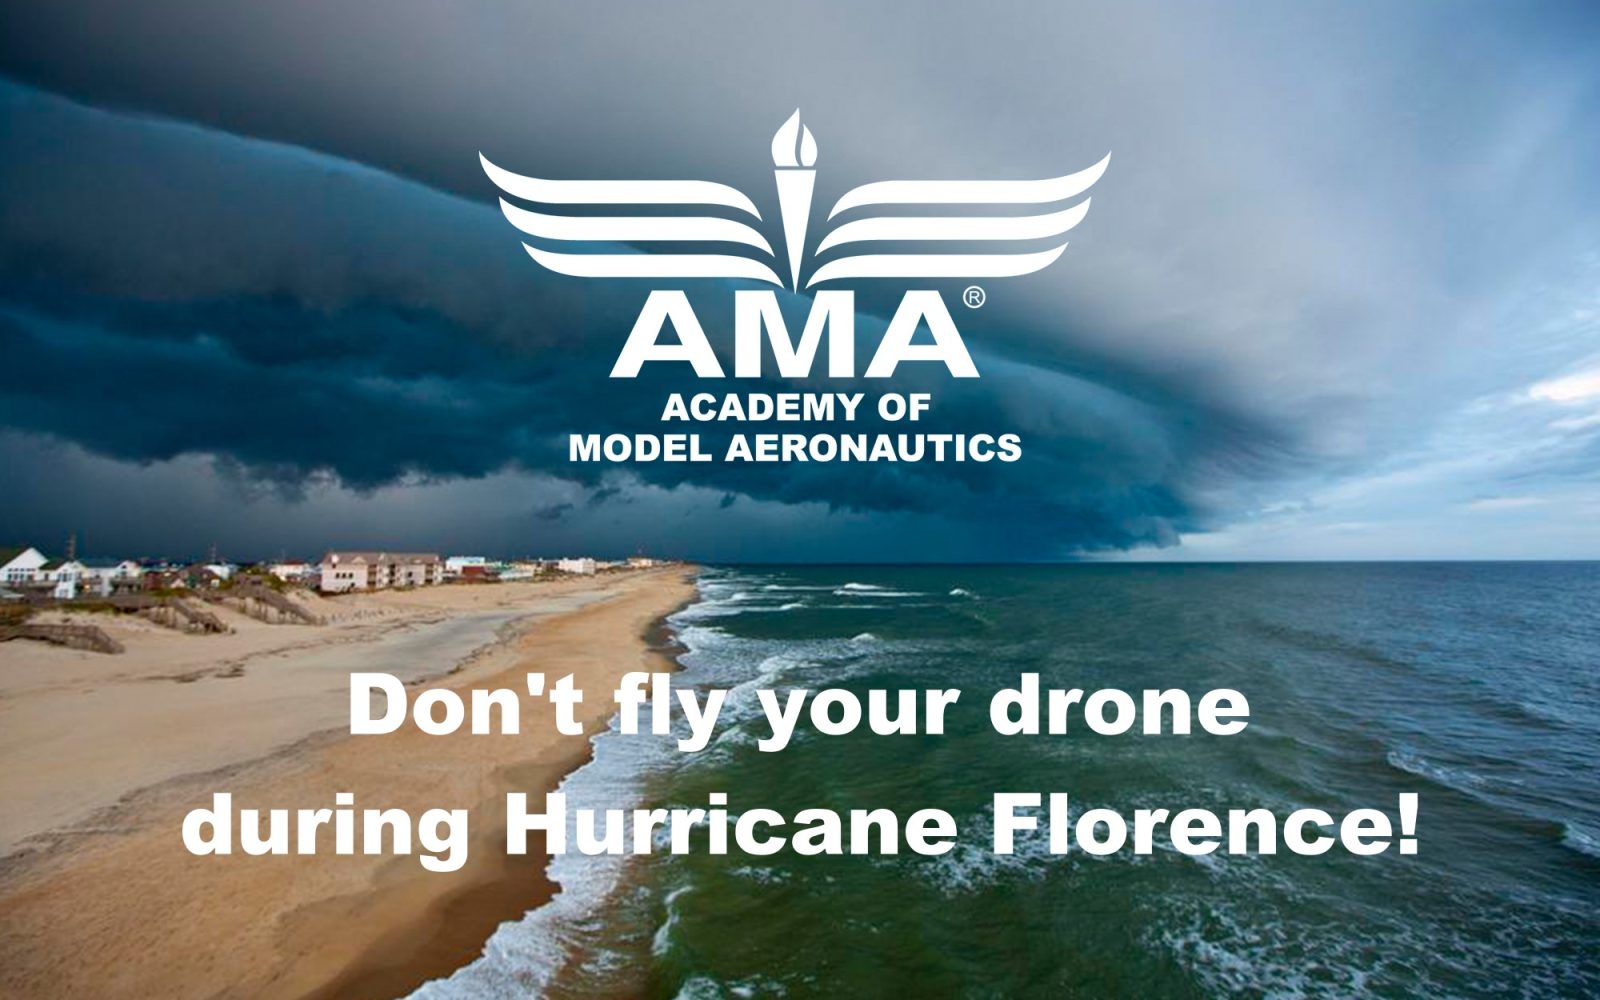 AMA warns all drone pilots not to fly their UAS during Hurricane Florence